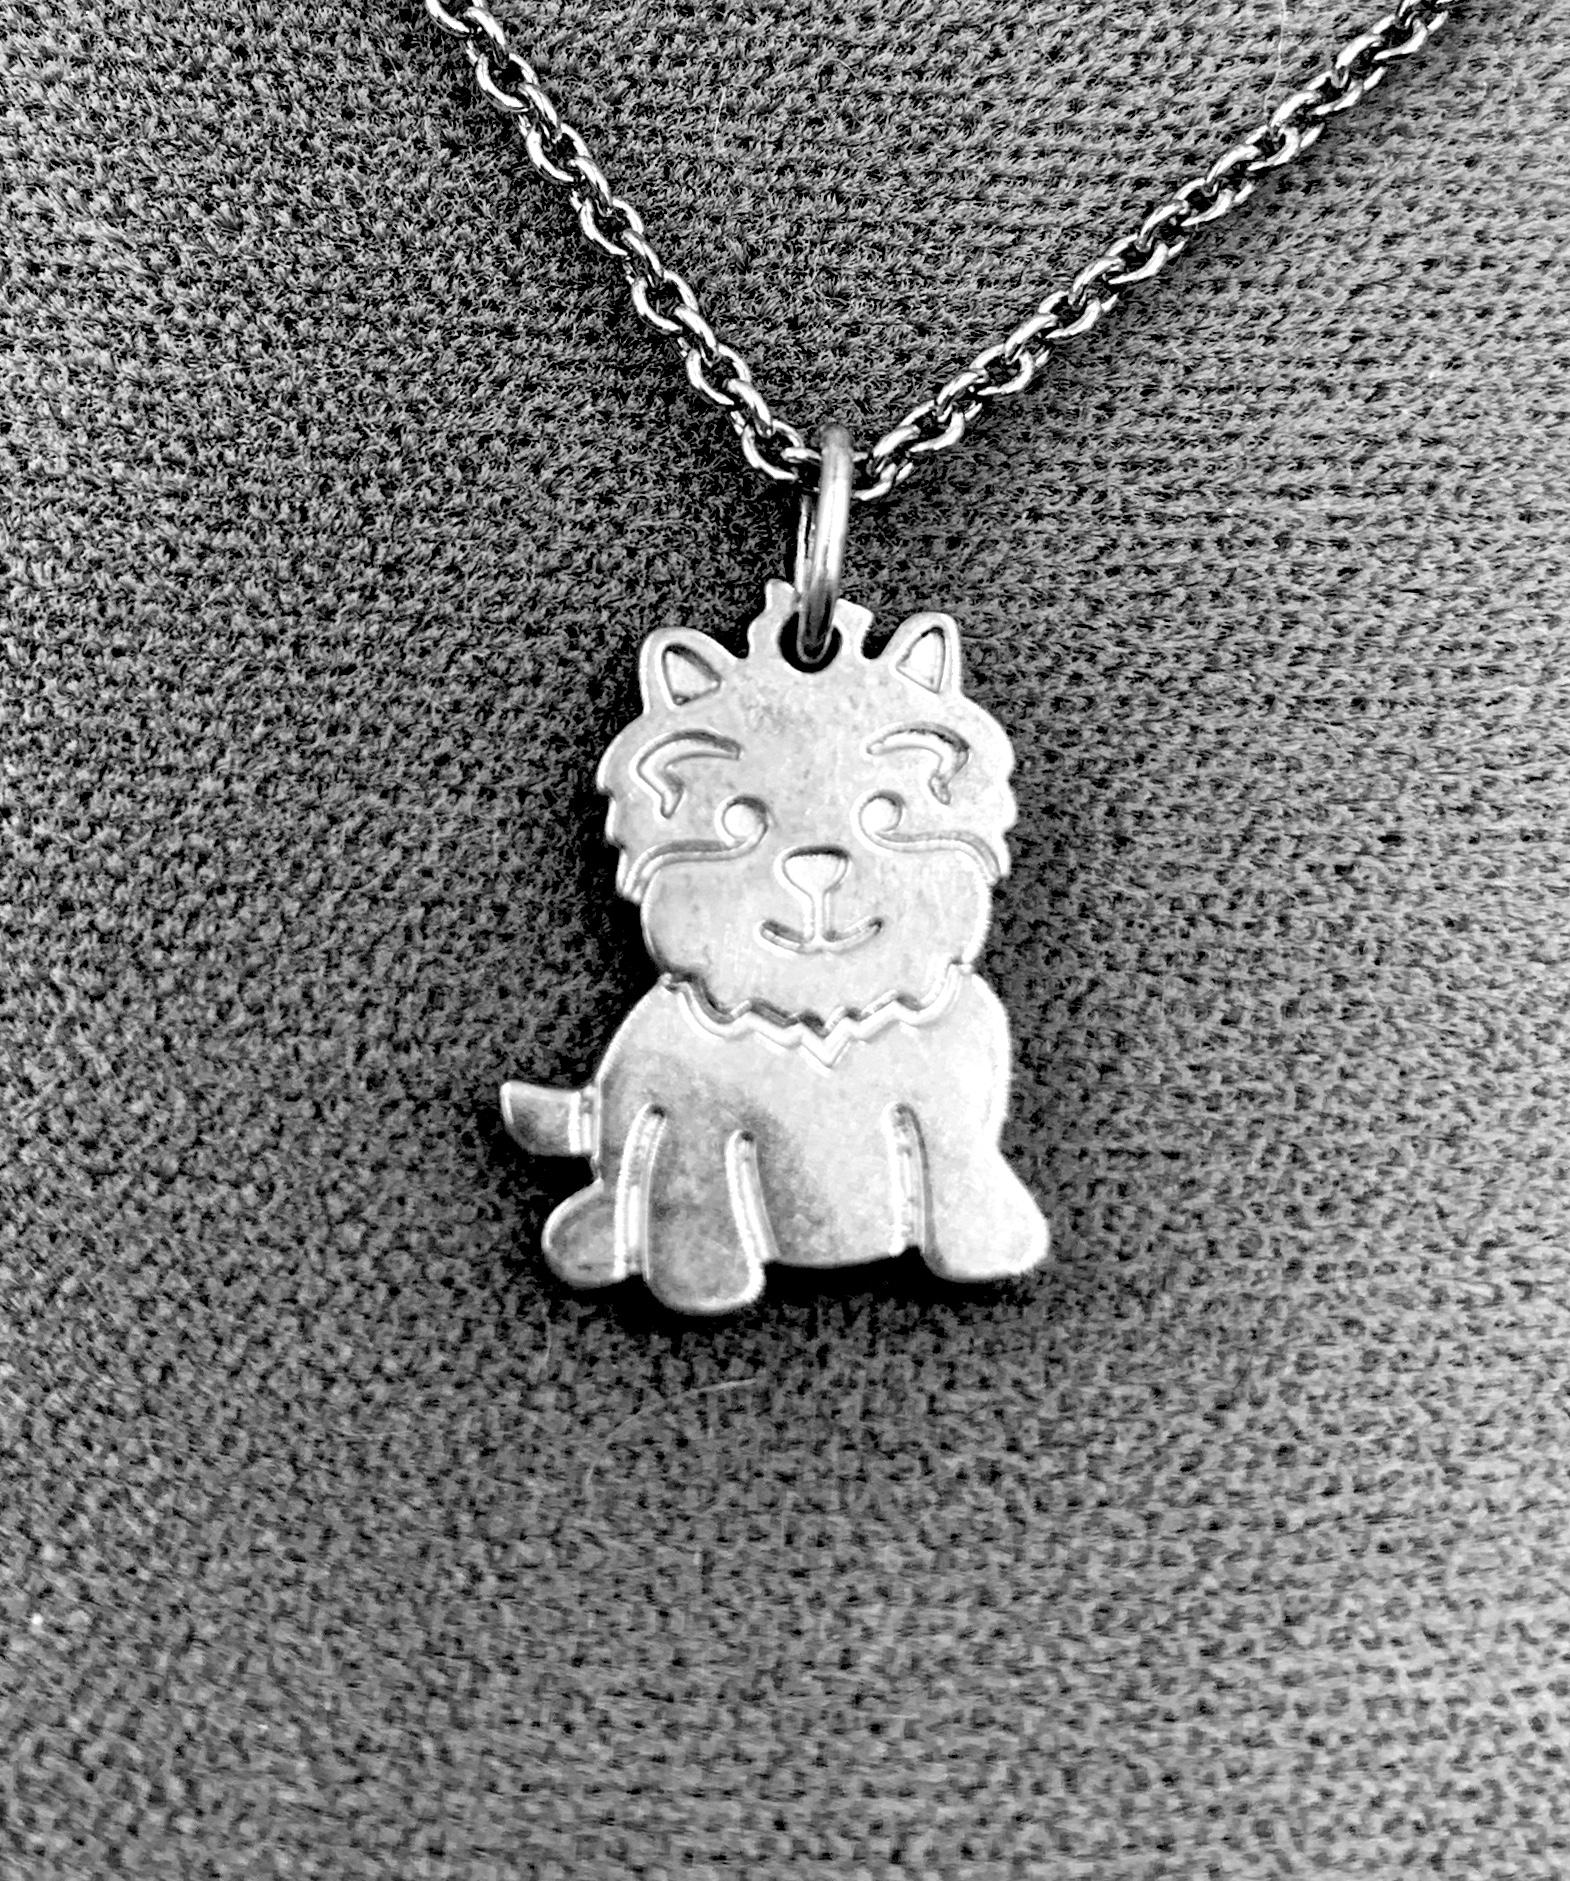 Charming and unusual vintage Tiffany pendant necklace of an adorable West Highland White Terrier. The pendant marked on back T&Co., AG925, NEW and chain marked Tiffany & Co., AG925. This necklace is in very good overall vintage condition. Chain is